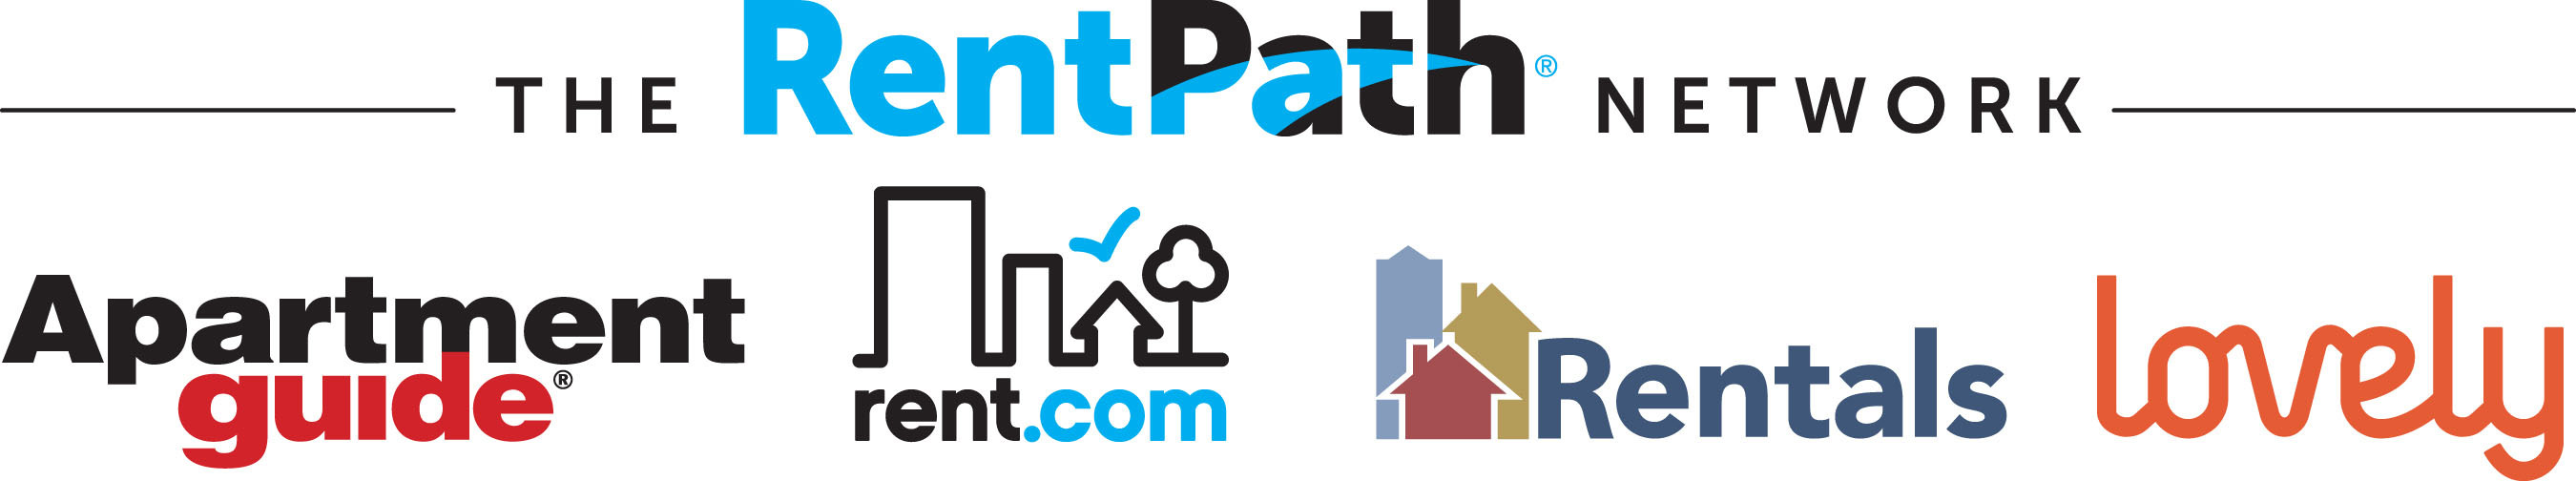 RentPath Inc., a leading digital media company, has a long-standing heritage in the real estate industry to empower millions of people nationwide to find apartments, houses for rent and new homes for sale.  RentPath's category-leading brands include Apartment Guide, Rent.com, Lovely, Rentals.com, RentalHouses.com, and New Home Guide.  All total, its network of websites reaches over 7 million unduplicated unique visitors monthly.  RentPath, Inc. has its headquarters in Norcross, Georgia (outside of Atlanta).  For more information, visit www.rentpath.com.